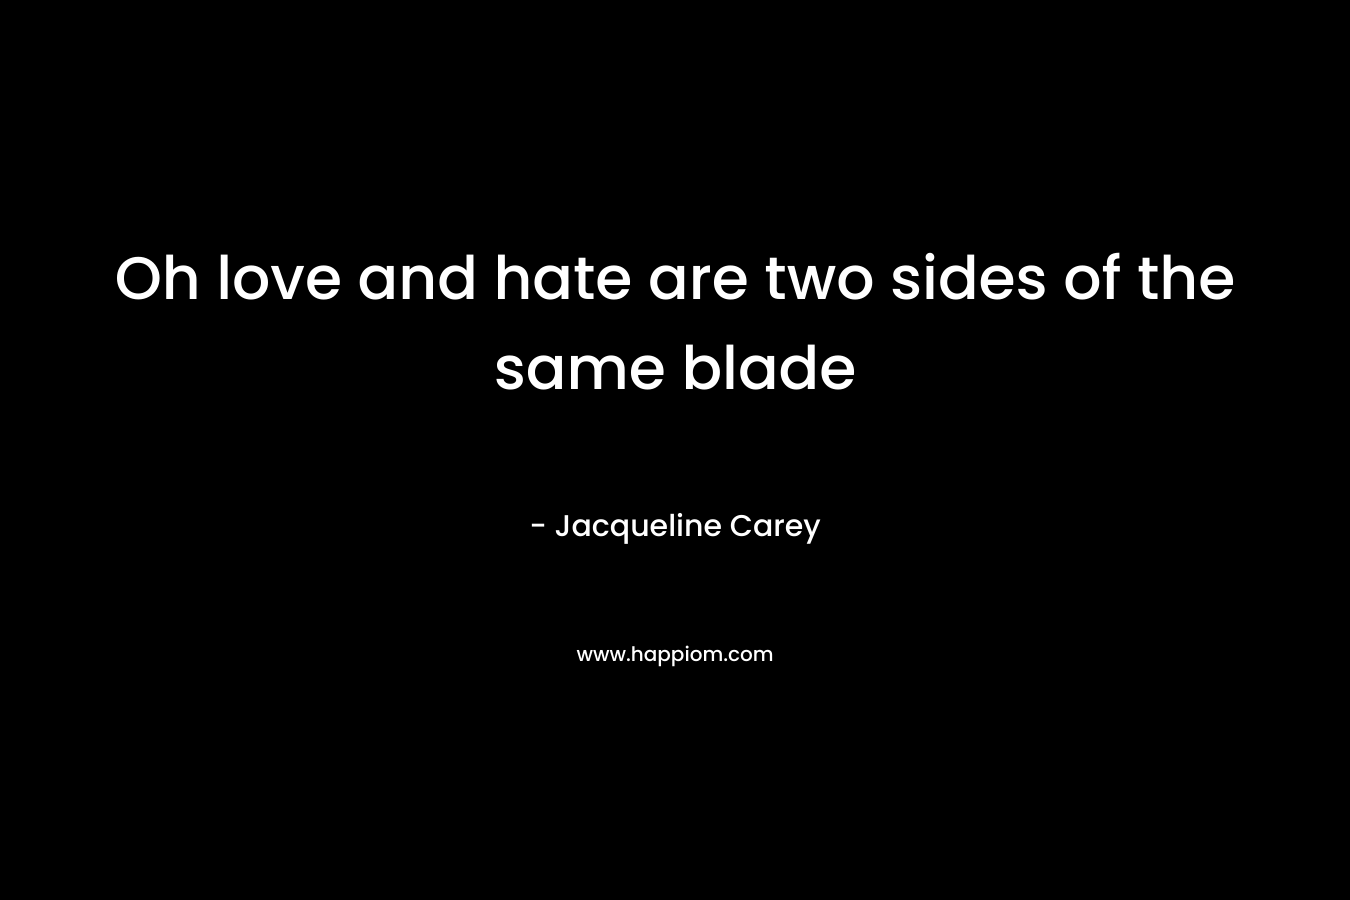 Oh love and hate are two sides of the same blade – Jacqueline Carey